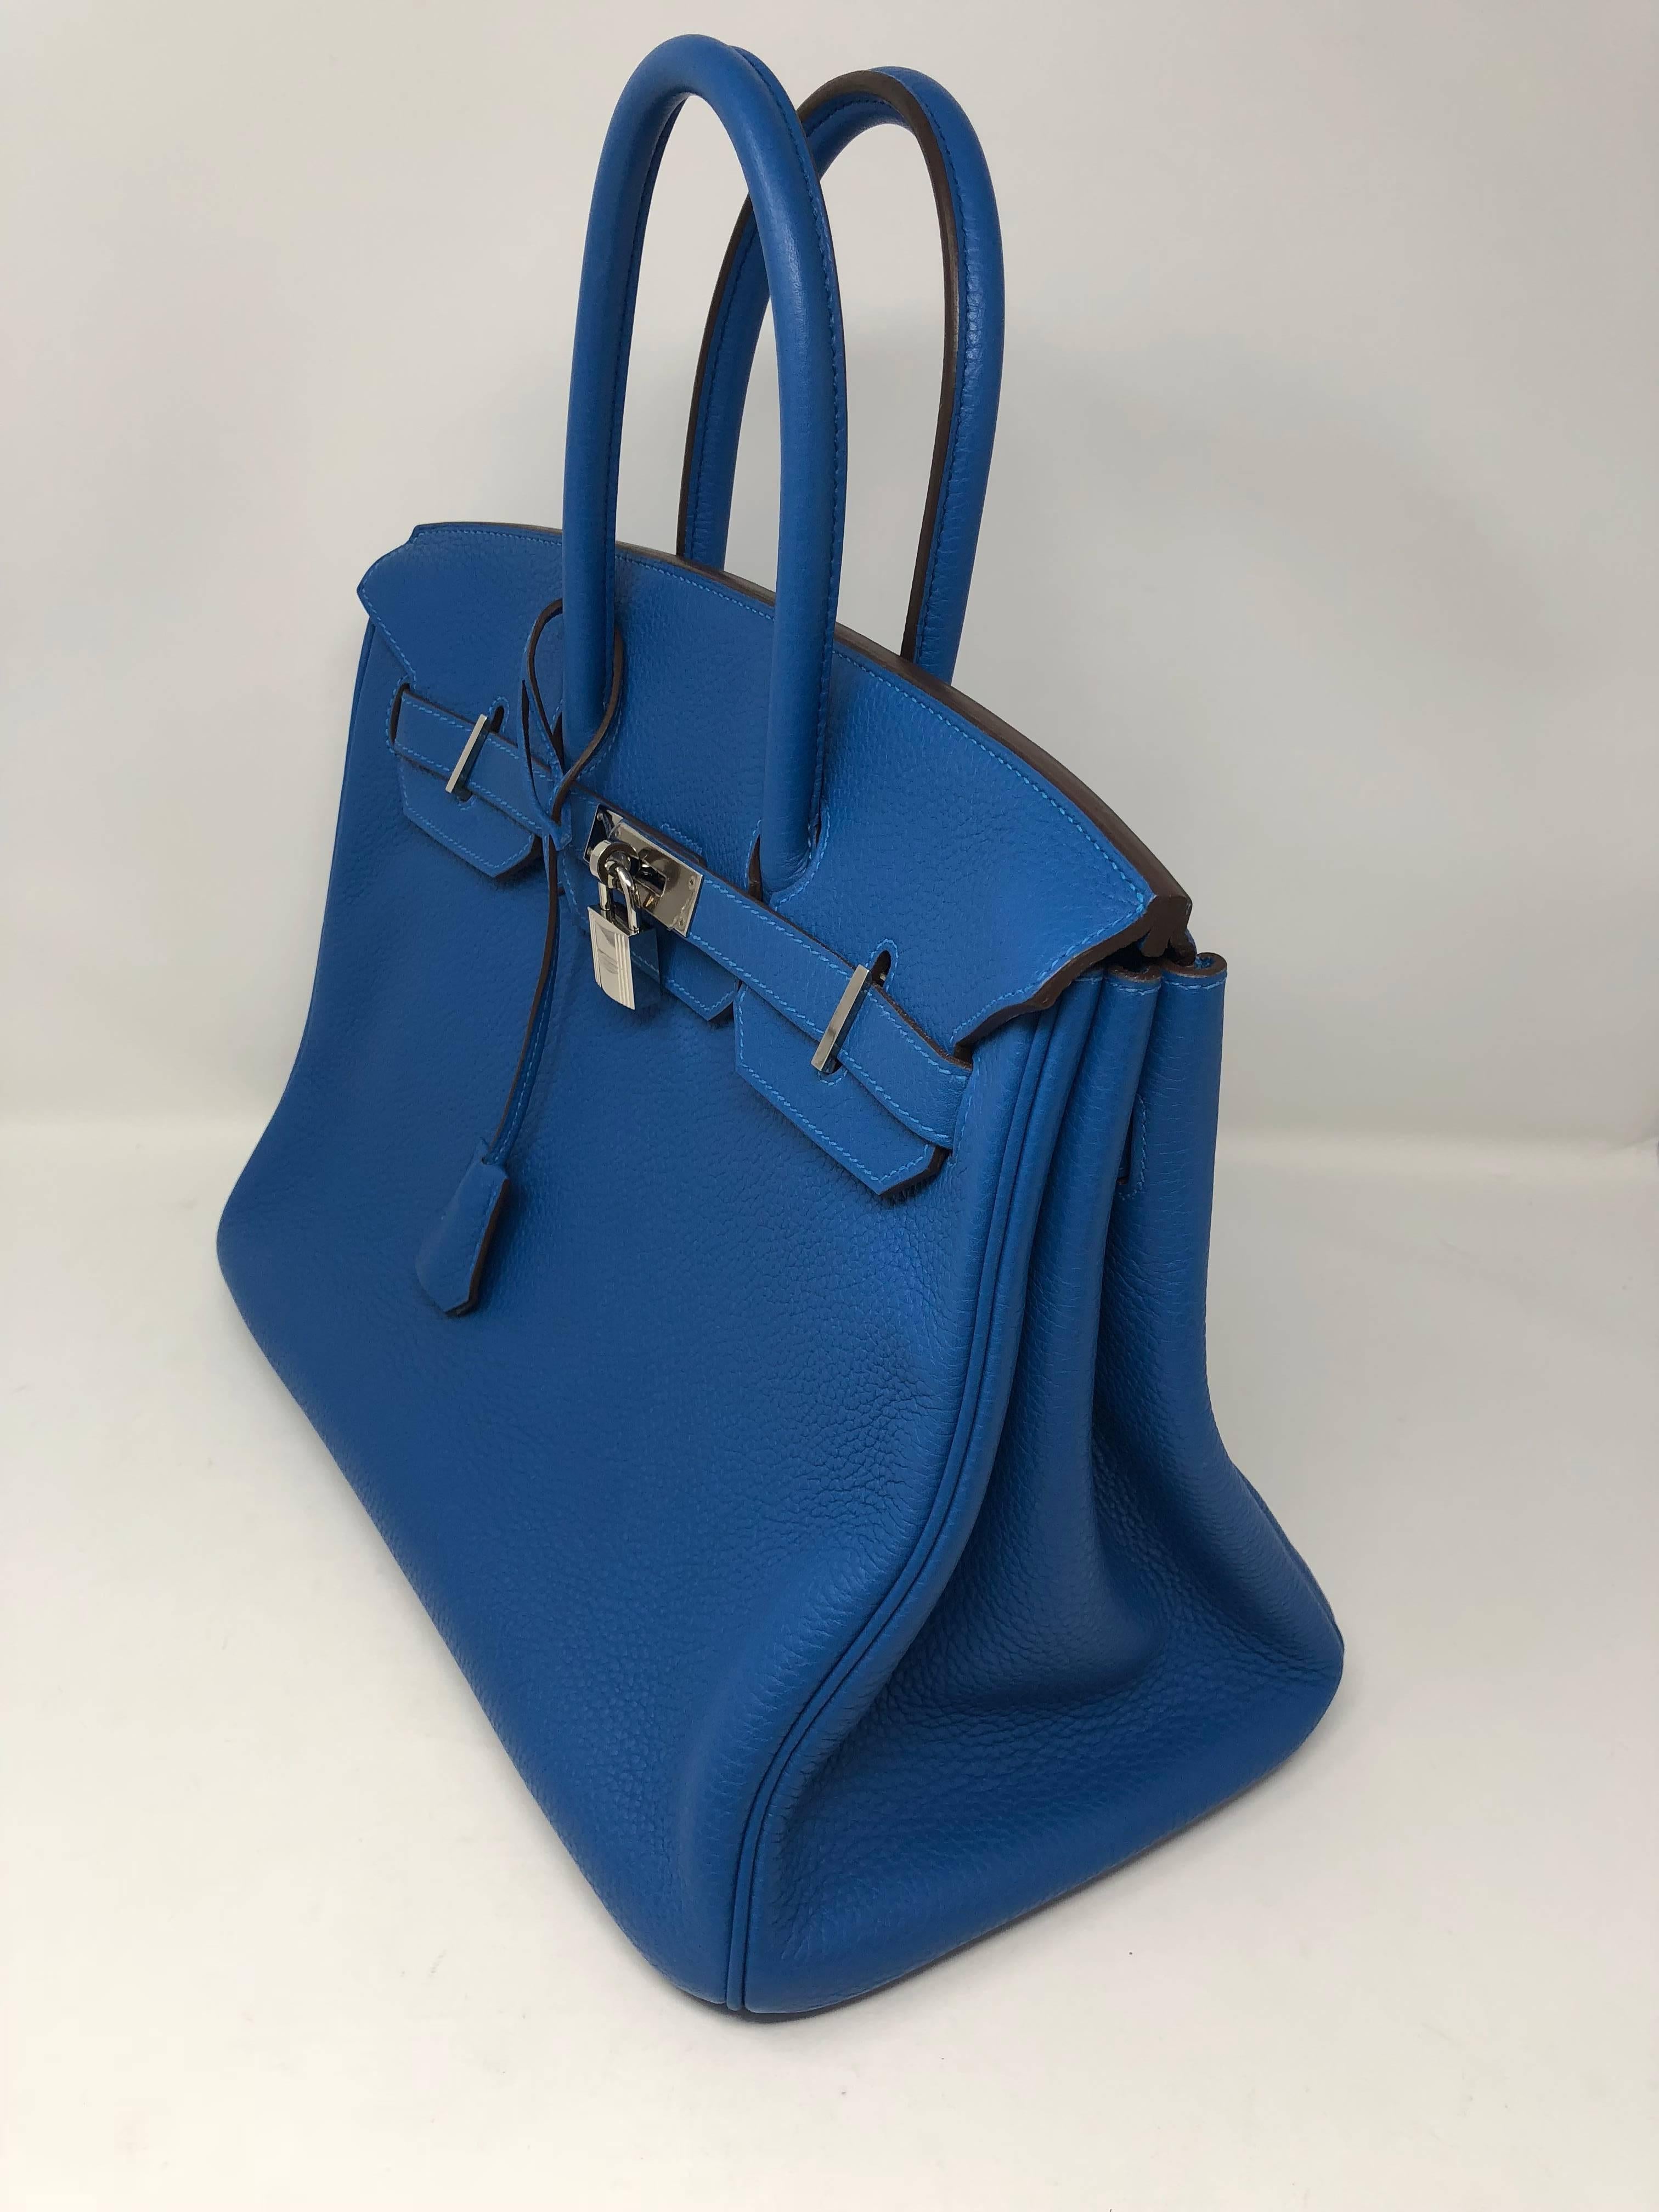 Beautiful Blue Mykonos Hermes Birkin 35 with palladium hardware. Bag is in mint condition with little wear. Color is rare and hard to find. Guaranteed authentic and comes with clochette, keys, dust cover and rain jacket. 